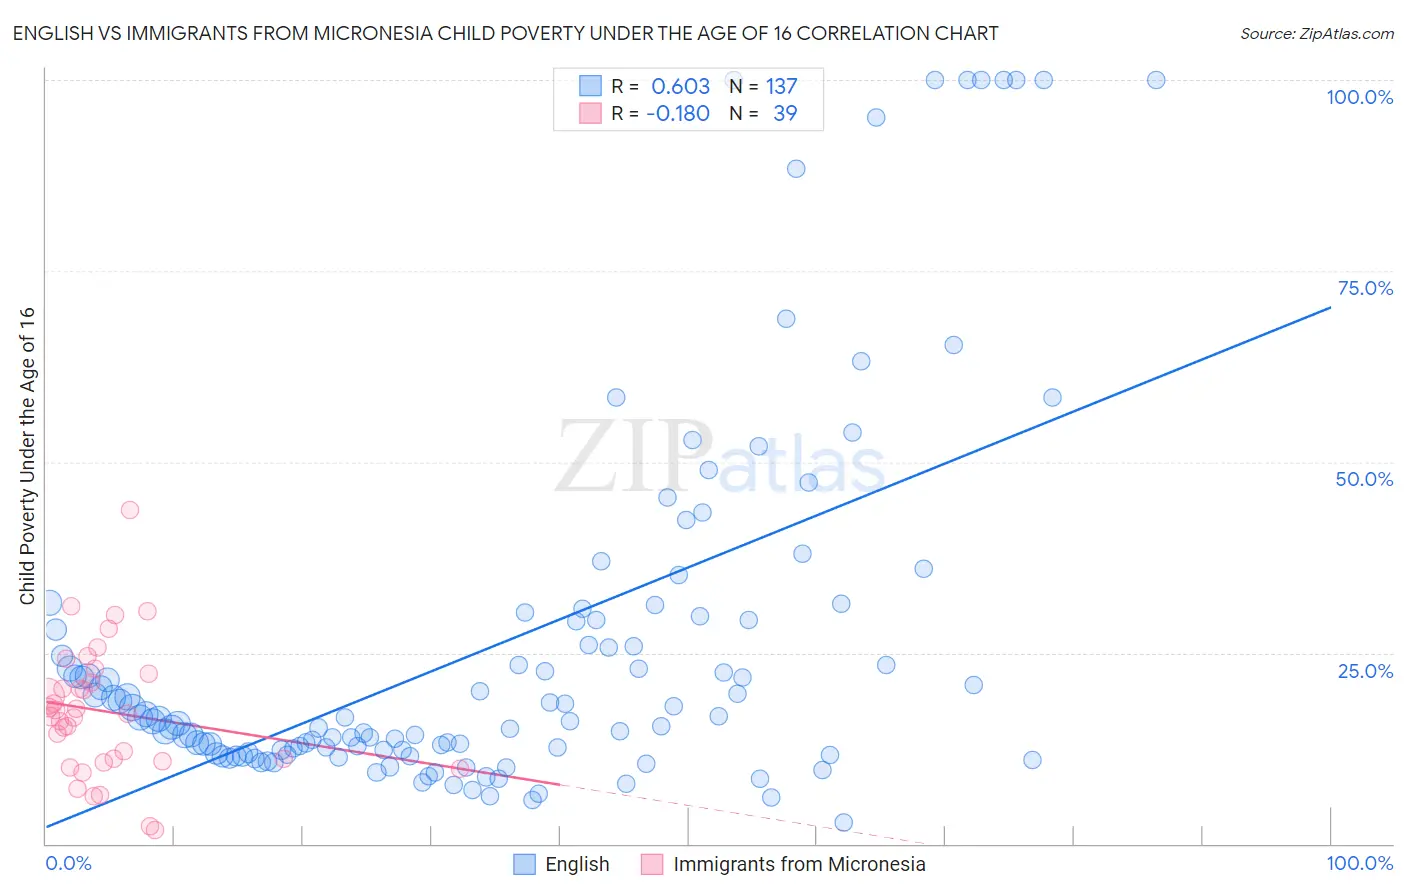 English vs Immigrants from Micronesia Child Poverty Under the Age of 16